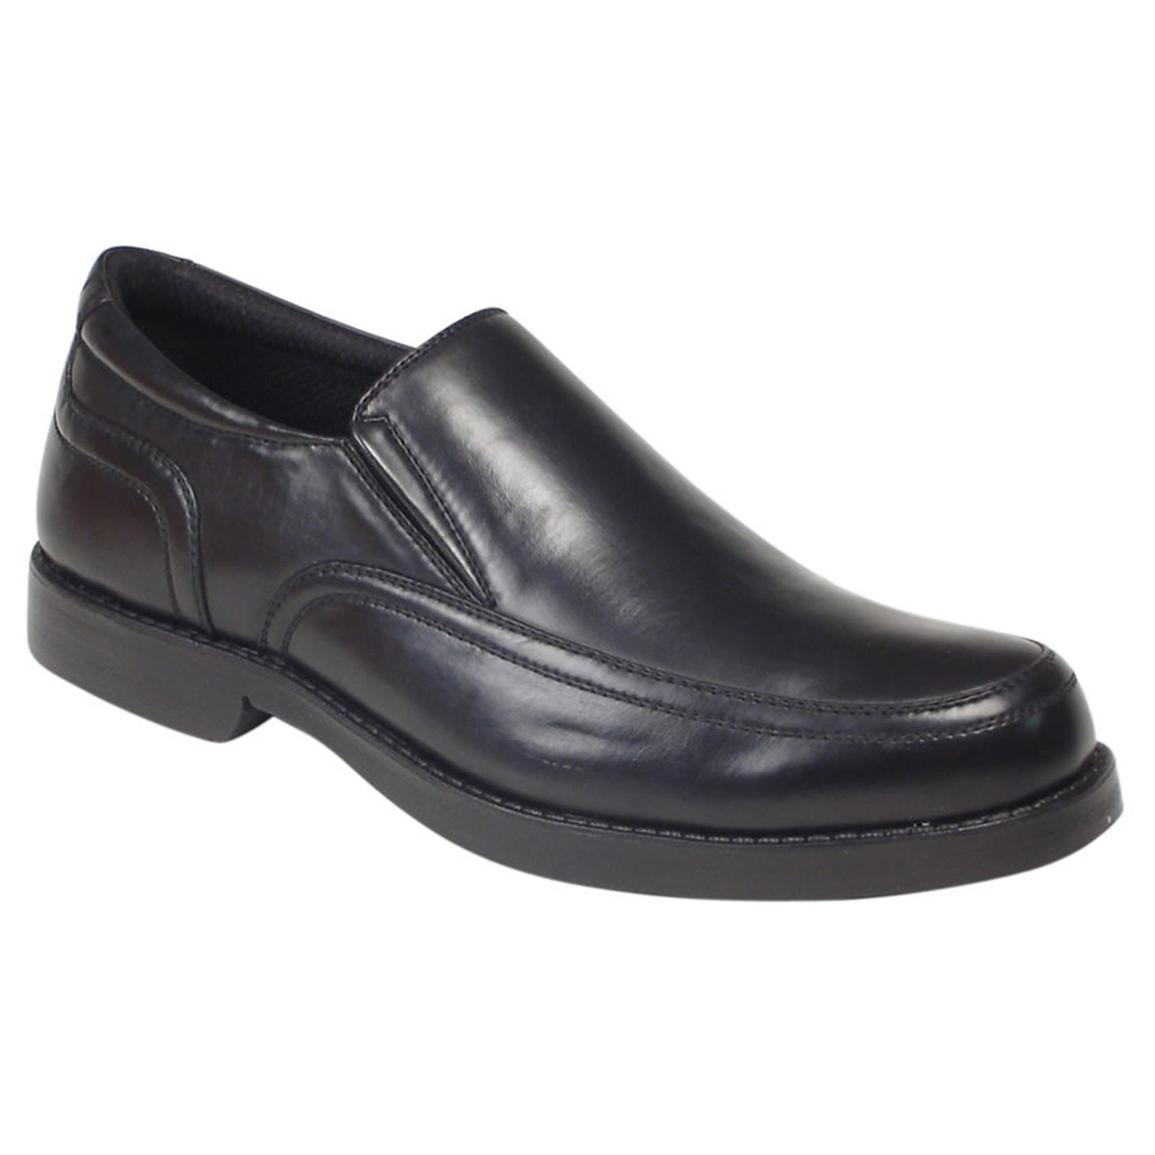 Men's Deer Stags® Wyatt Shoes - 154039, Dress Shoes at Sportsman's Guide